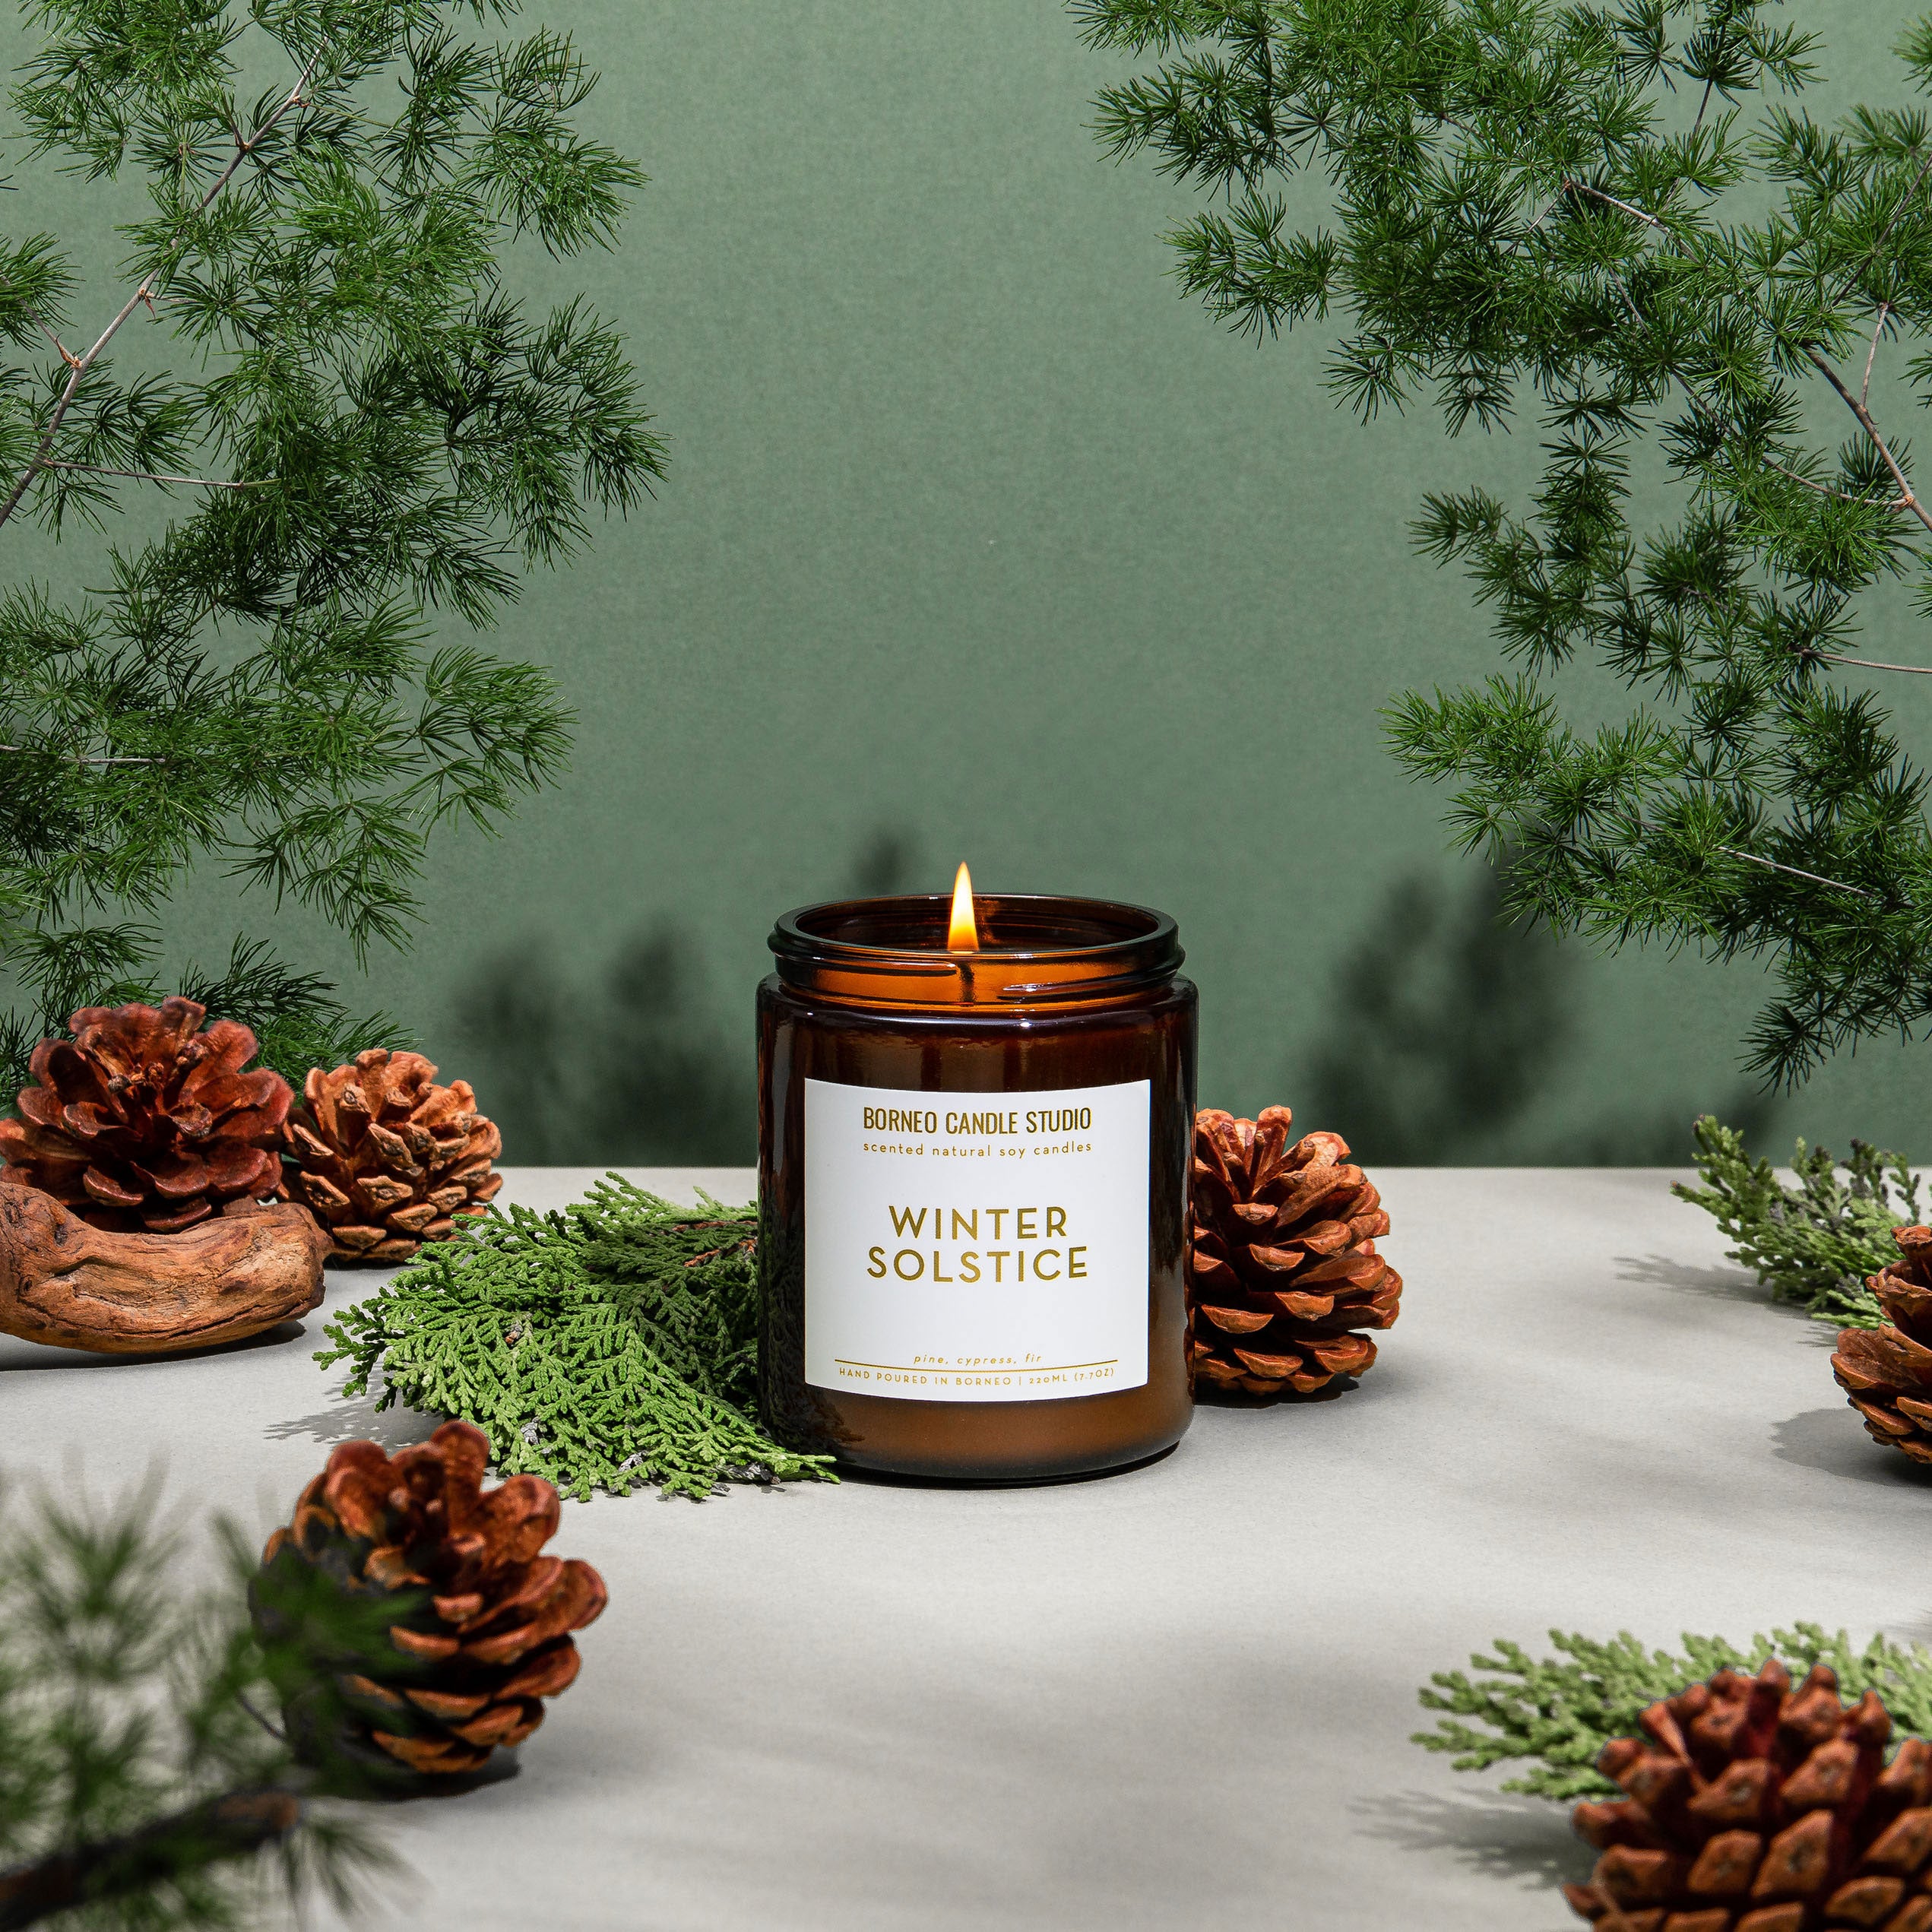 Winter Solstice Borneo Candle Studio Scented Candle Christmas 2022